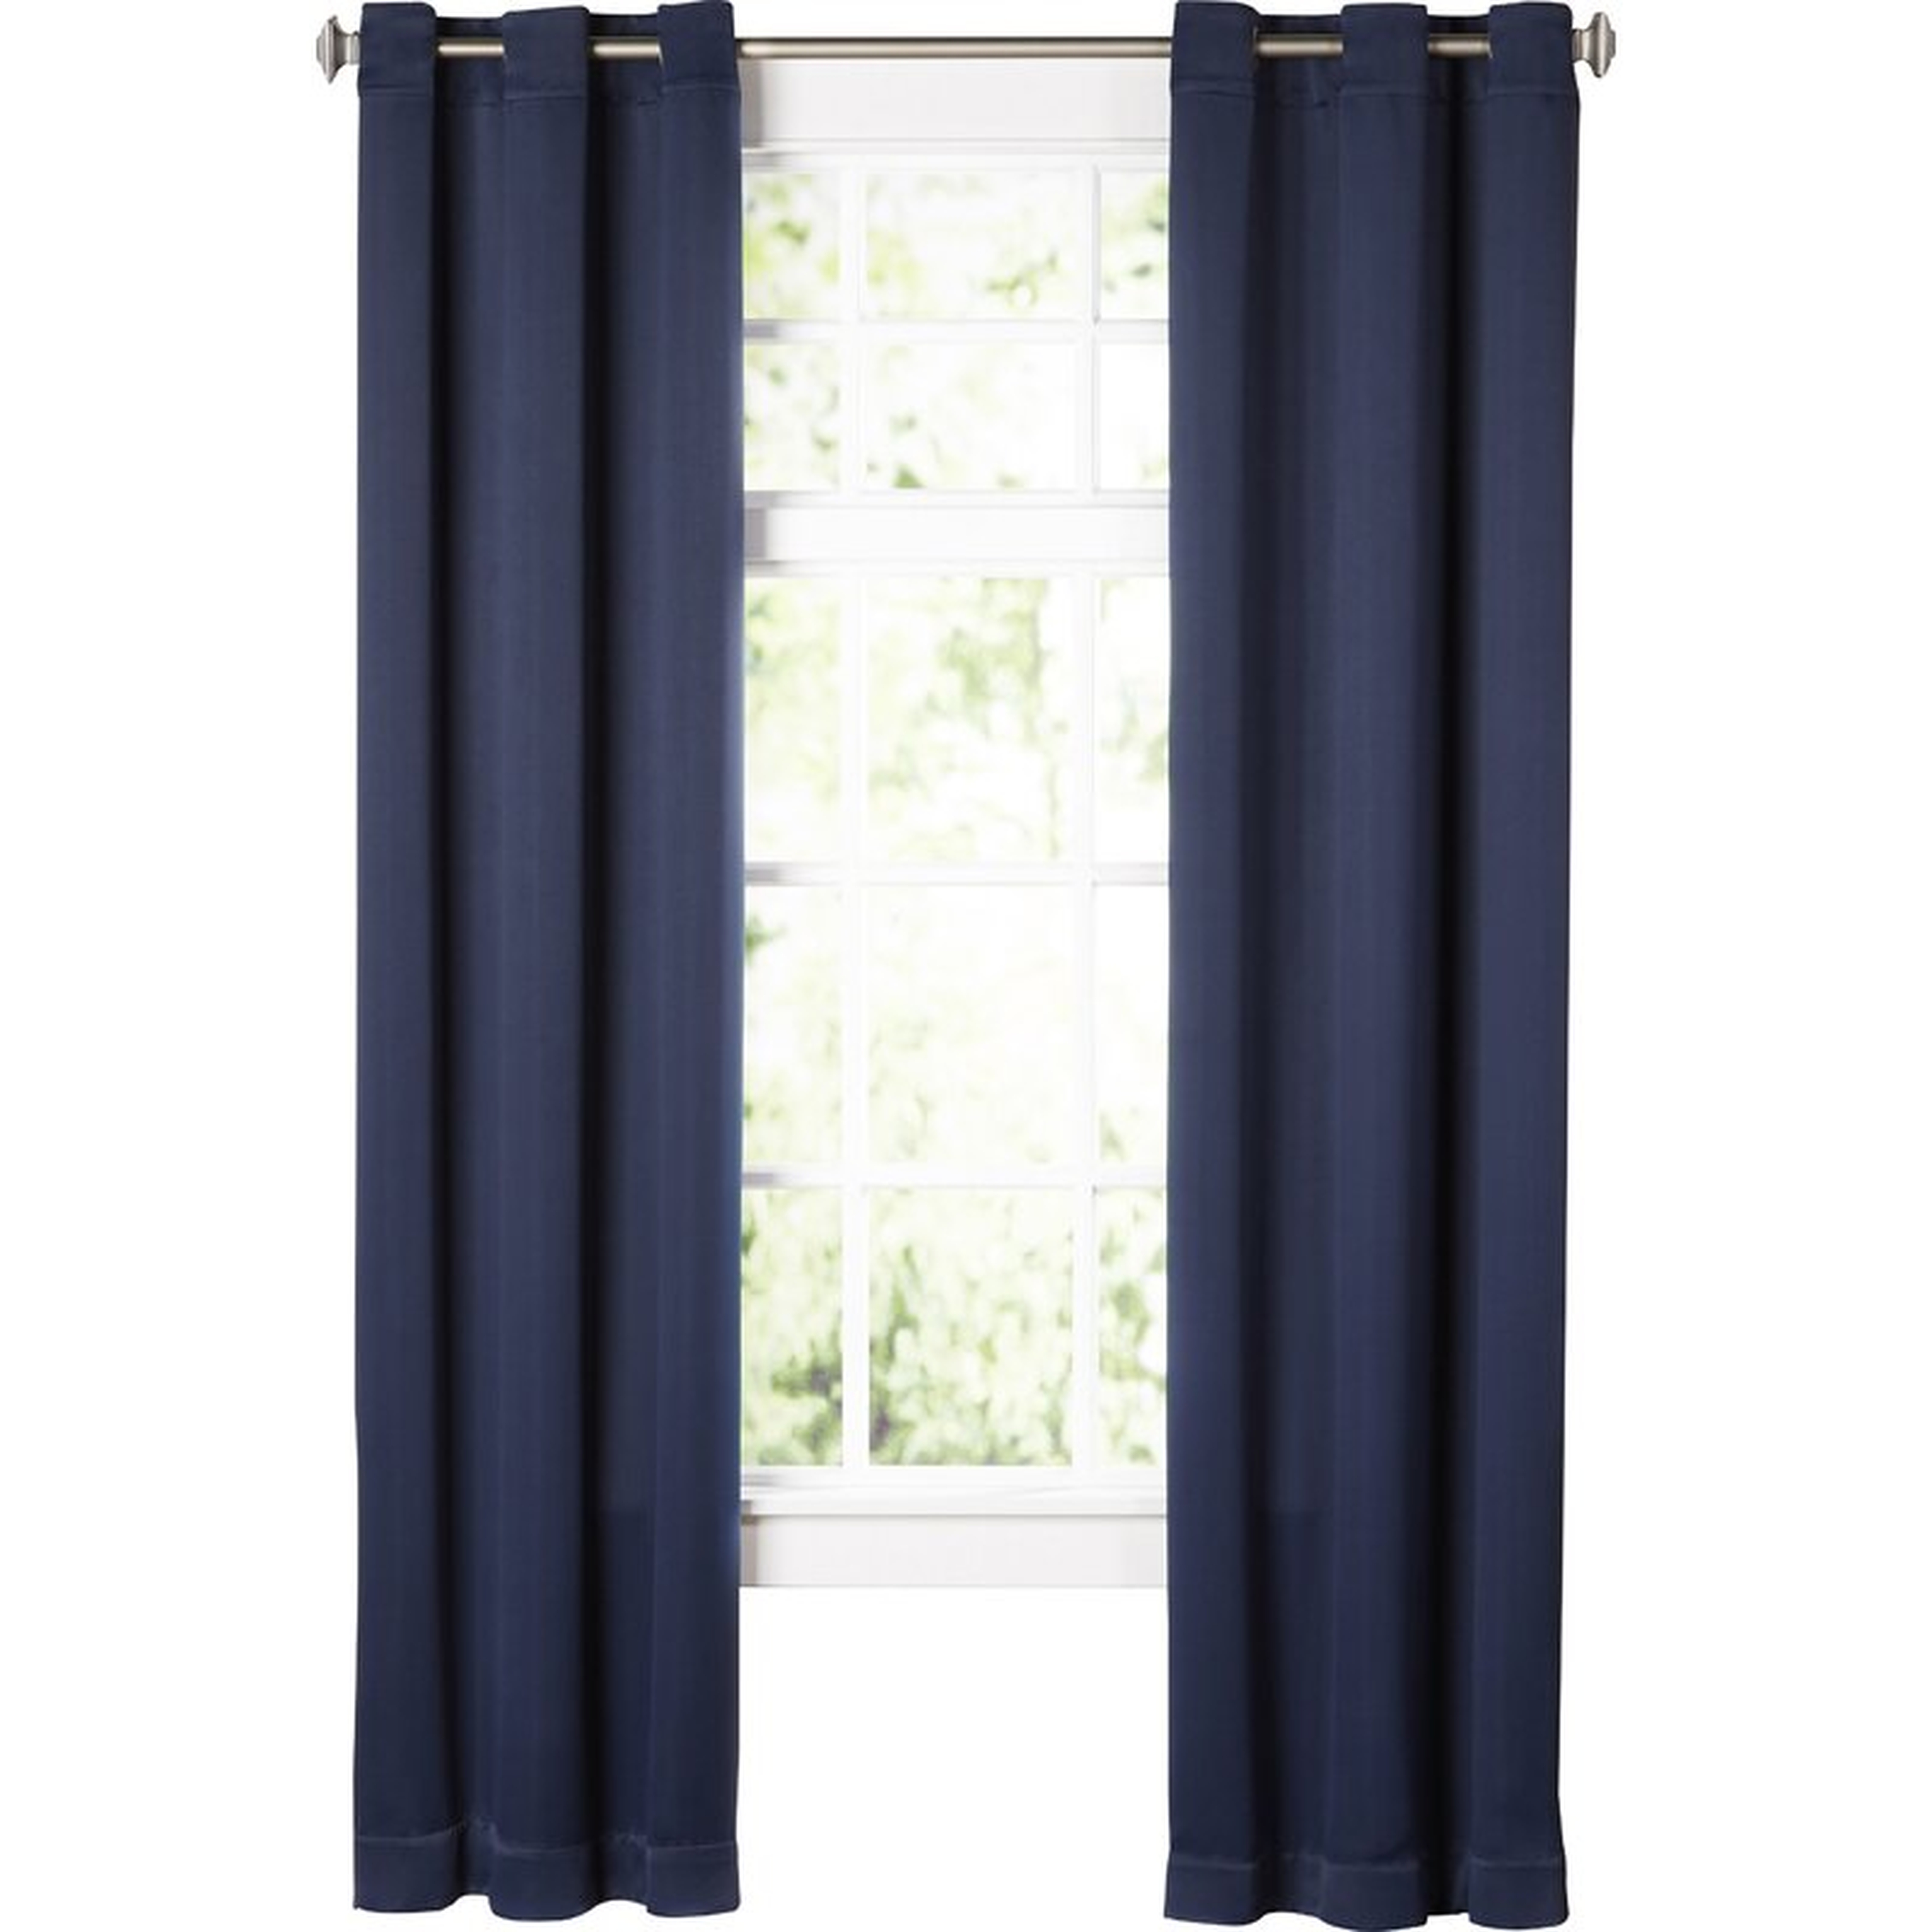 Traditional Bedroom Design Shop the Look  by Lionsgate Design in Classic Dr.    Wayfair Basics Solid Blackout Grommet Single Curtain Panel  Wayfair Basics Solid Blackout Grommet Single Curtain Panel  Wayfair Basics Solid Blackout Grommet Single Curtain Pa - Wayfair